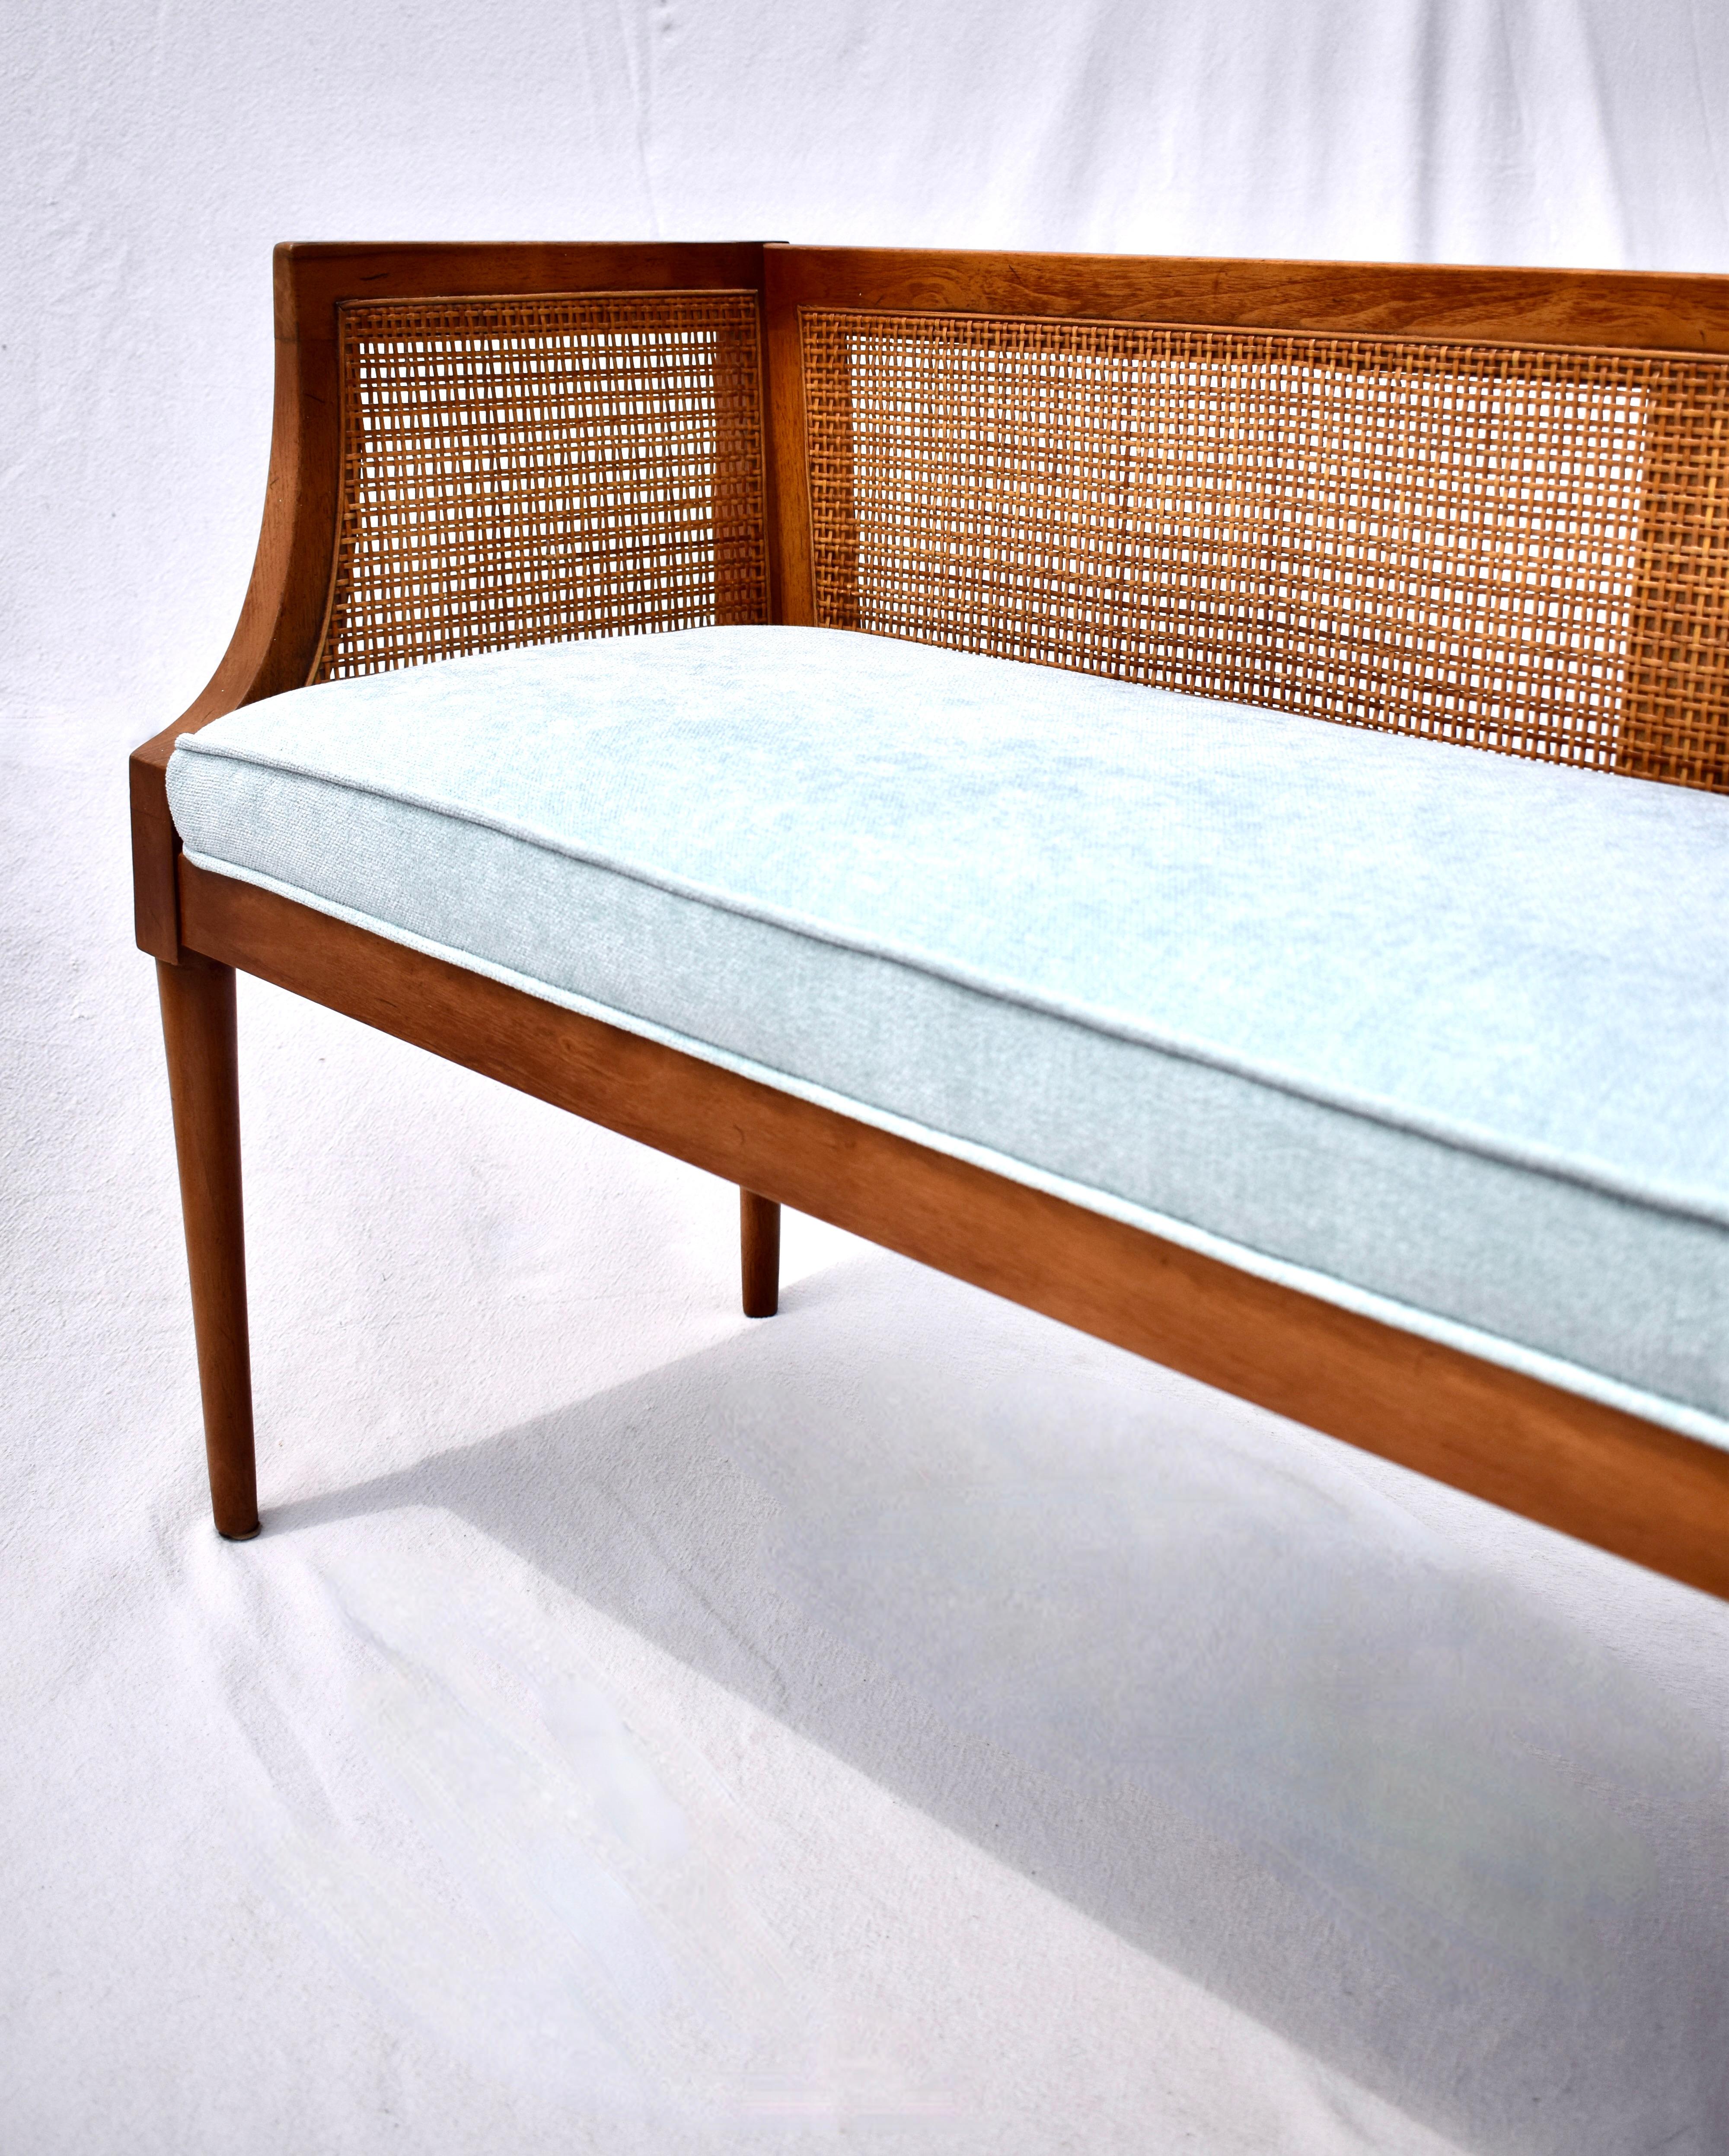 Upholstery 1950s Walnut Window Bench Attributed to Edward Wormley for Dunbar